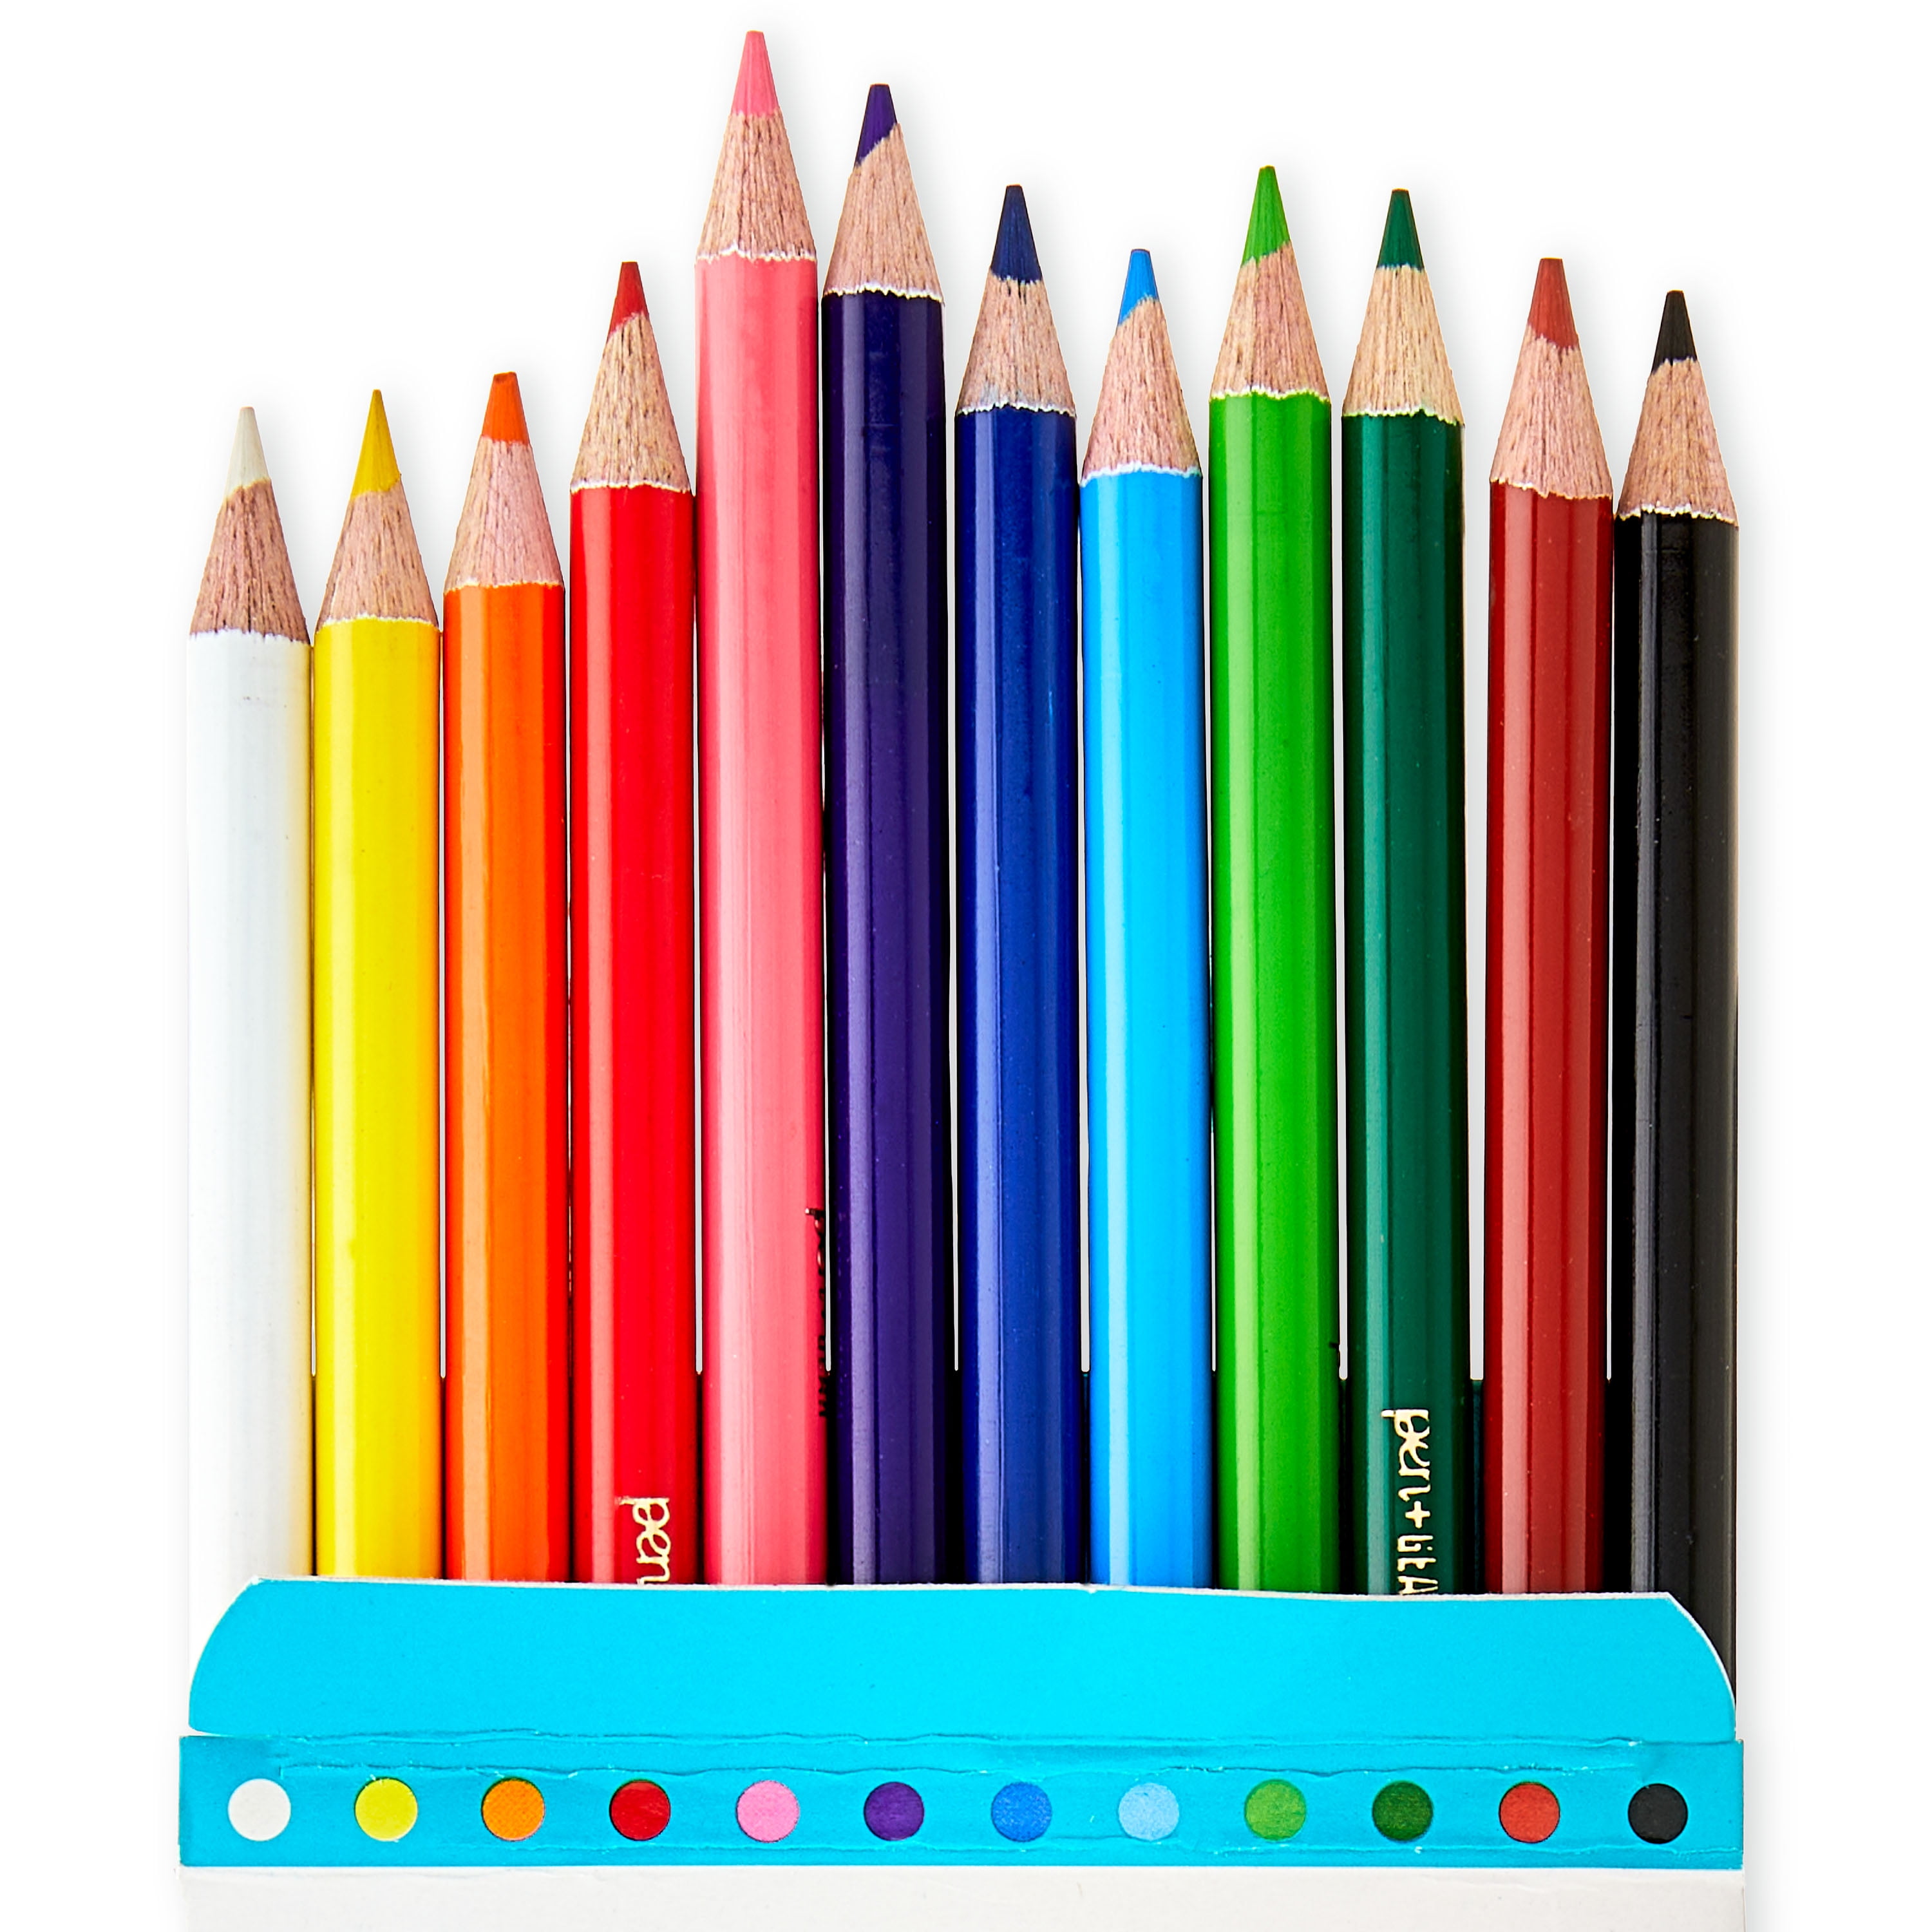 12-Count Pen+Gear Sharpened Colored Pencils only $0.52